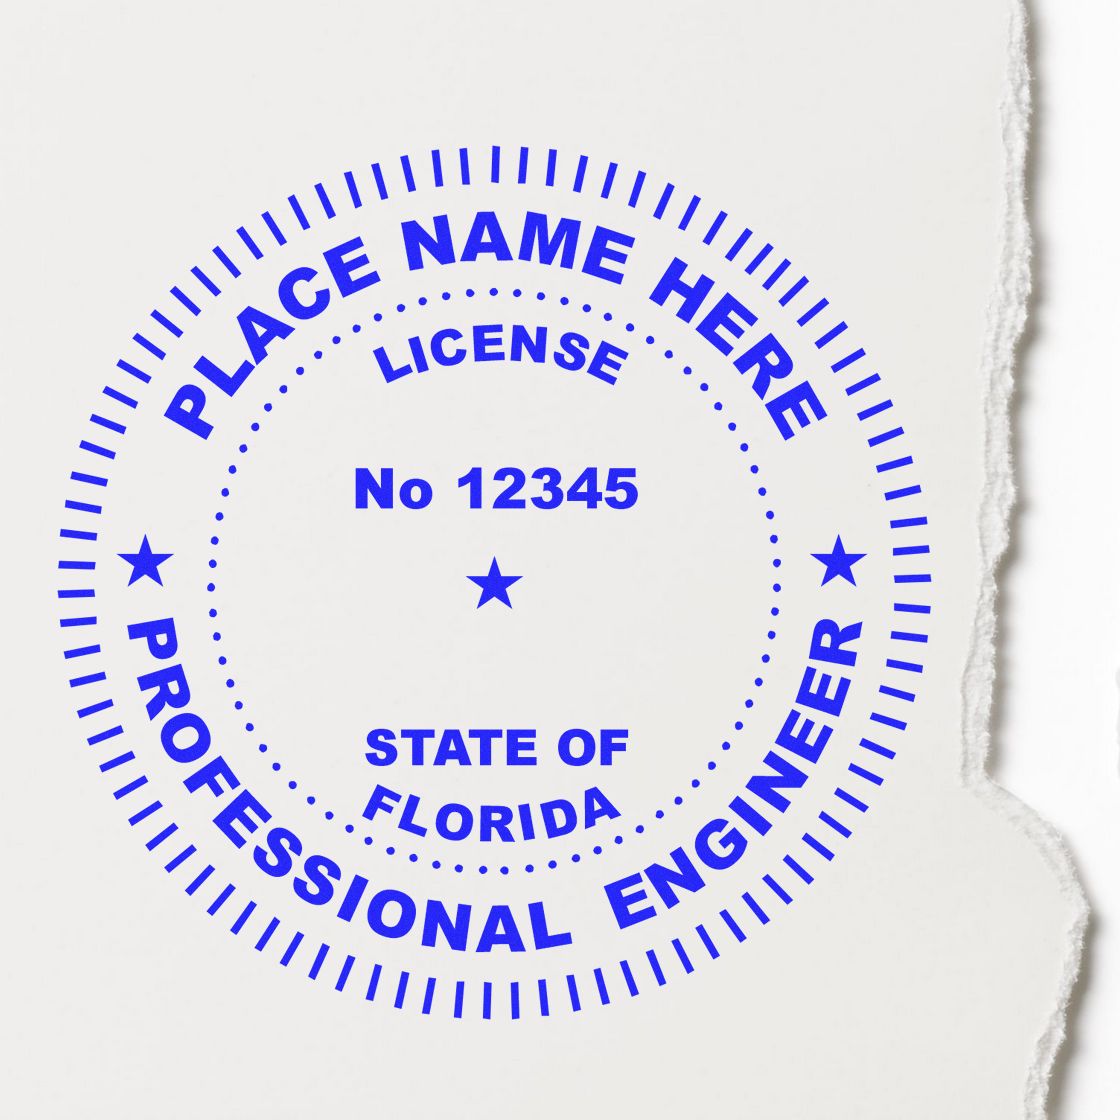 An alternative view of the Florida Professional Engineer Seal Stamp stamped on a sheet of paper showing the image in use